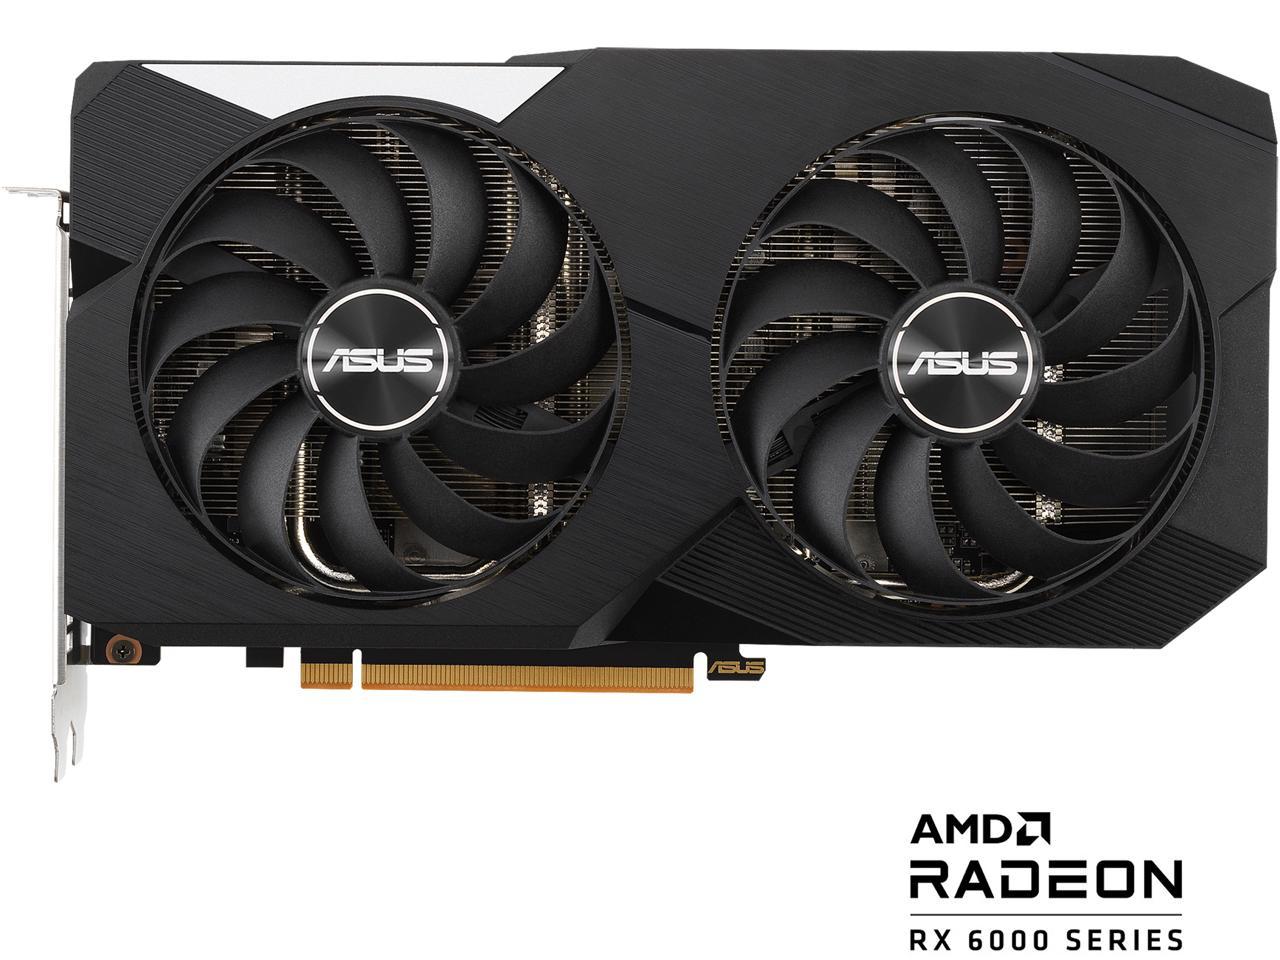 ASUS Dual AMD Radeon RX 6650 XT OC Edition 8GB GDDR6 Gaming Graphics Card $184.89 after $180 MIR and using Zip Checkout